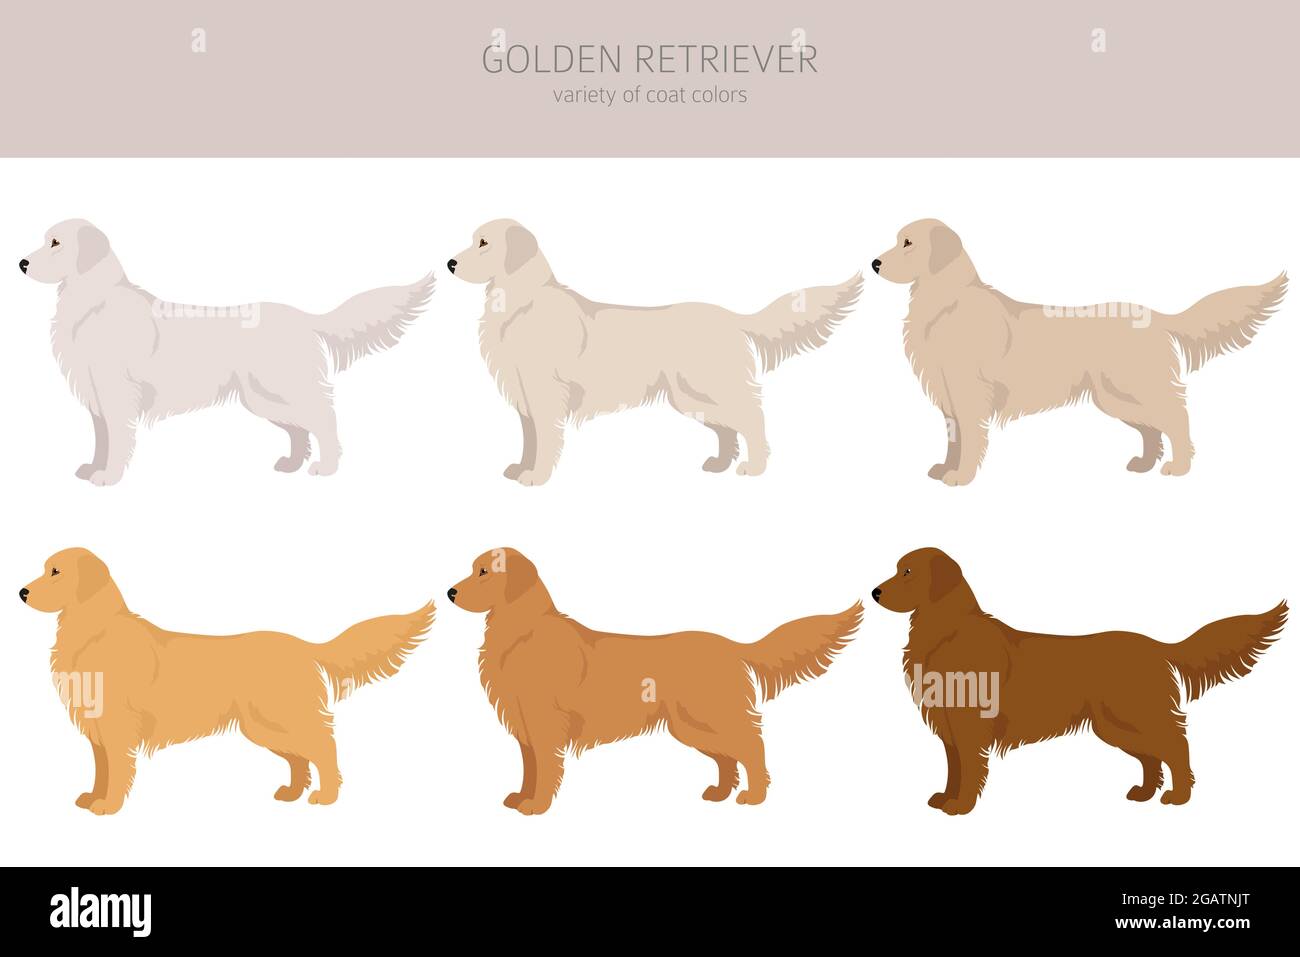 Golden retriever dogs in different poses and coat colors clipart. Vector  illustration Stock Vector Image & Art - Alamy